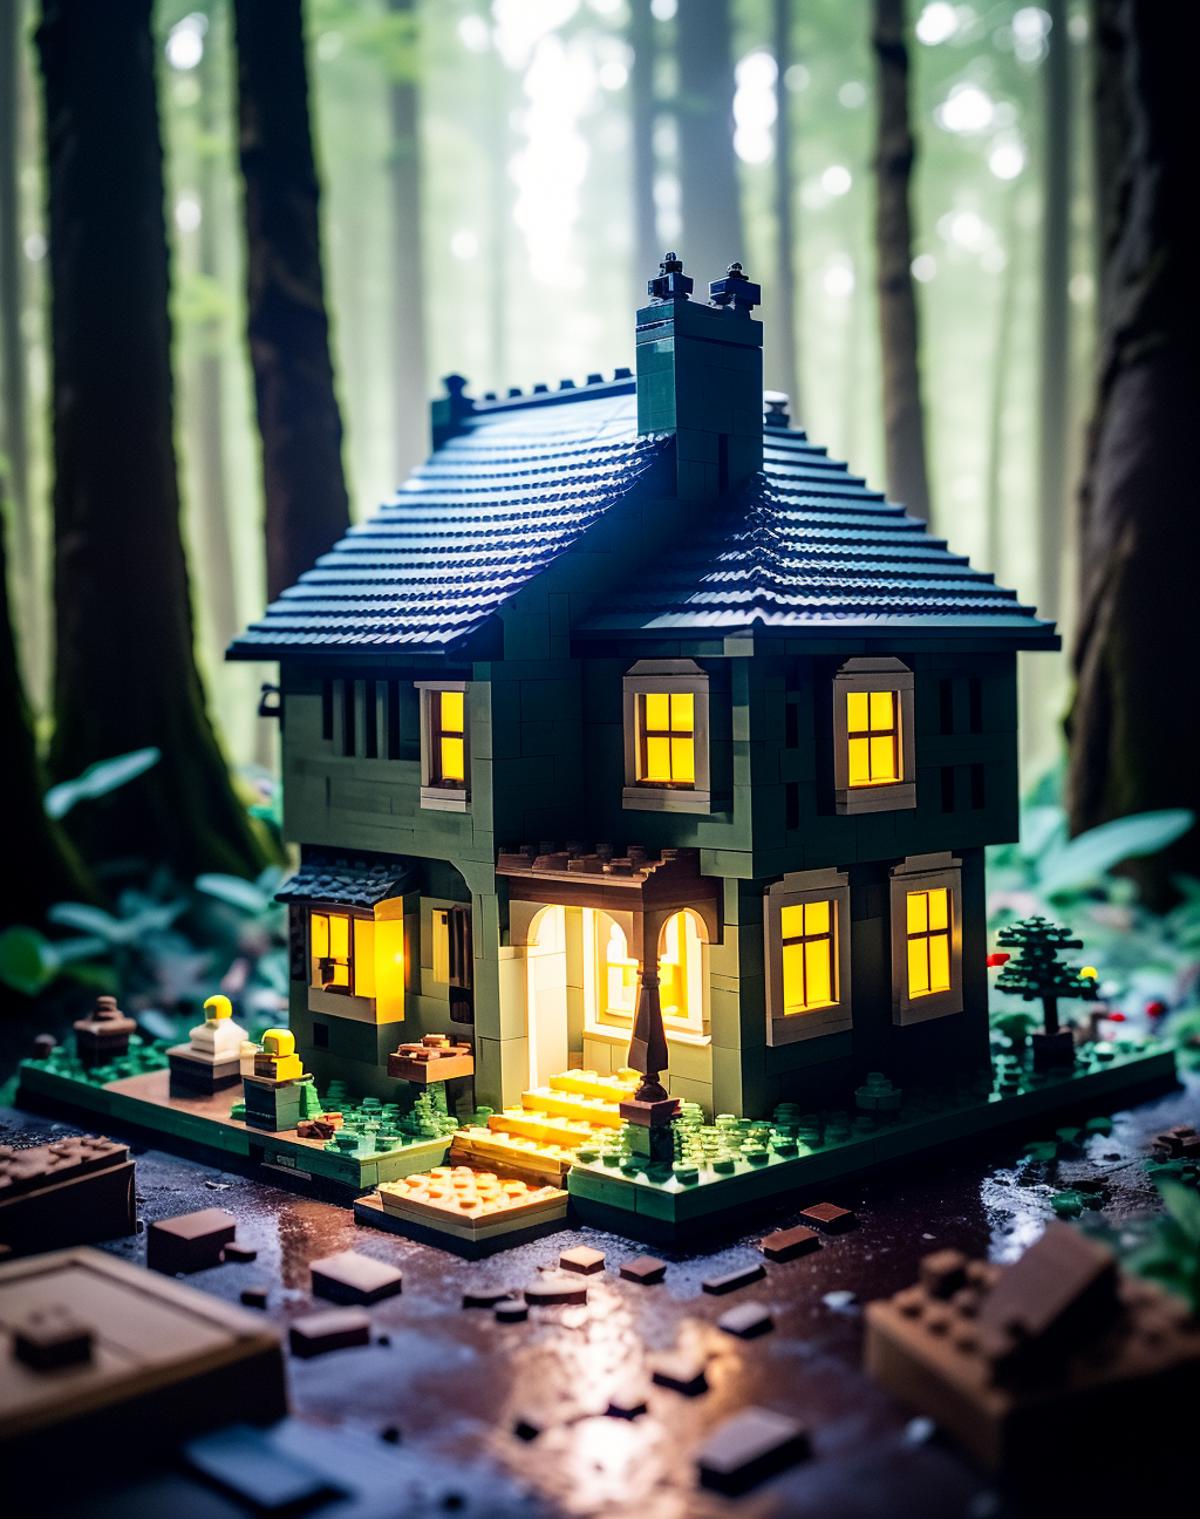 A Lego House in a Forest Setting at Night